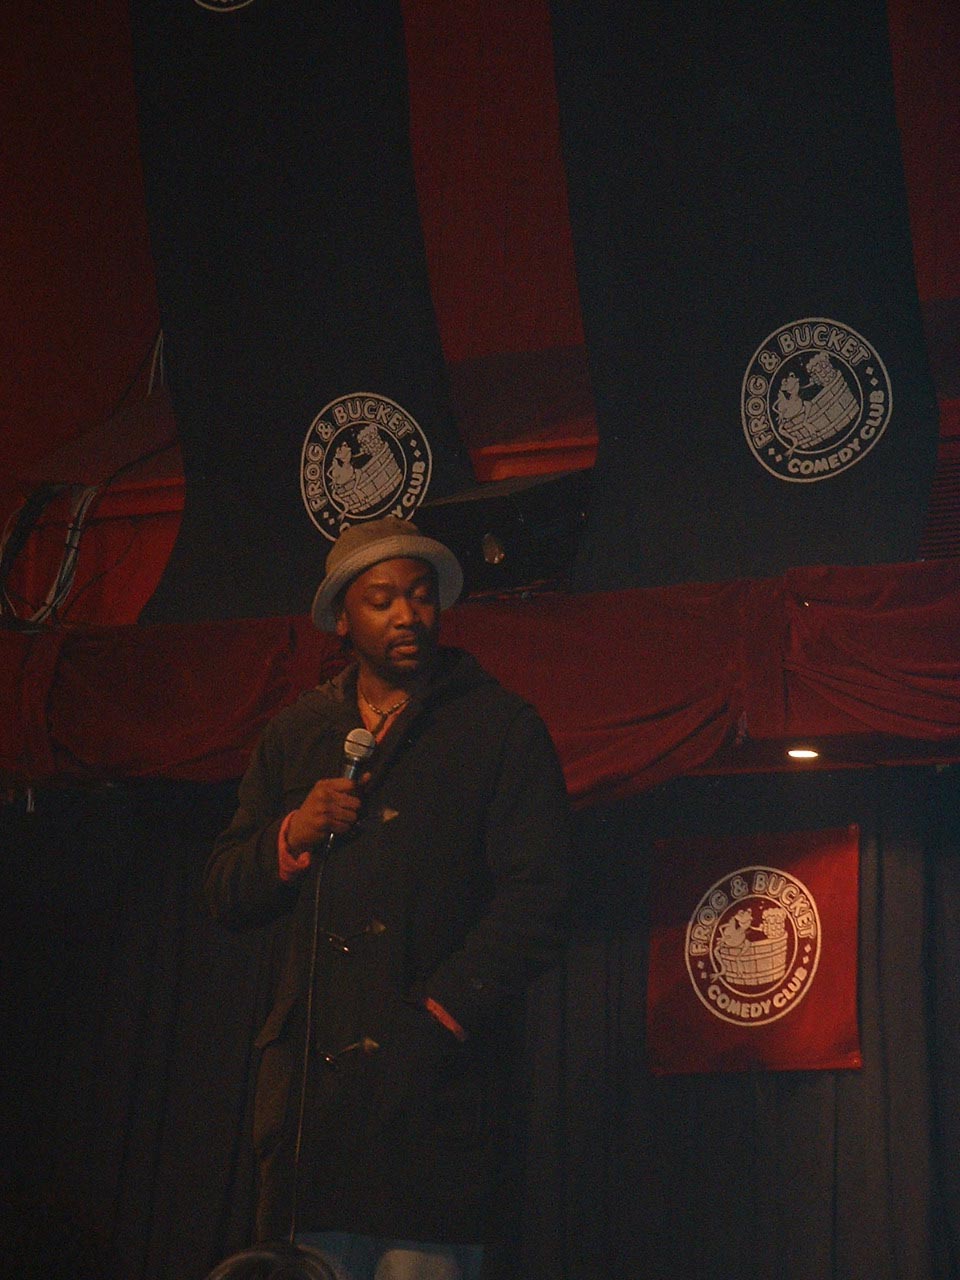 Reginald D Hunter performs at The Frog and Bucket!